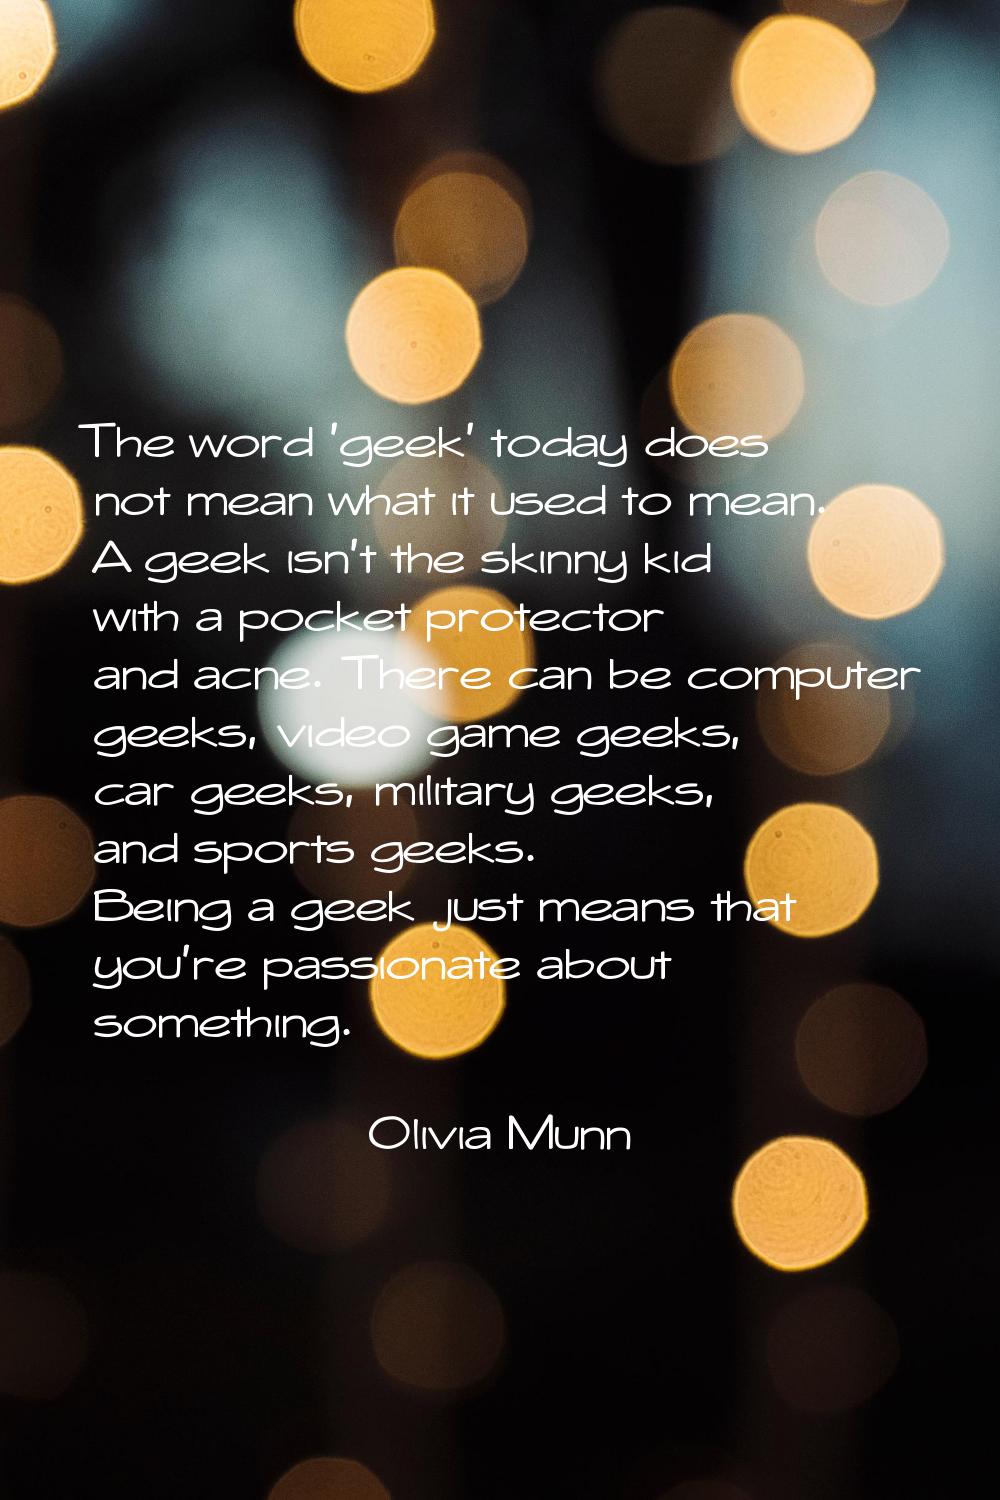 The word 'geek' today does not mean what it used to mean. A geek isn't the skinny kid with a pocket